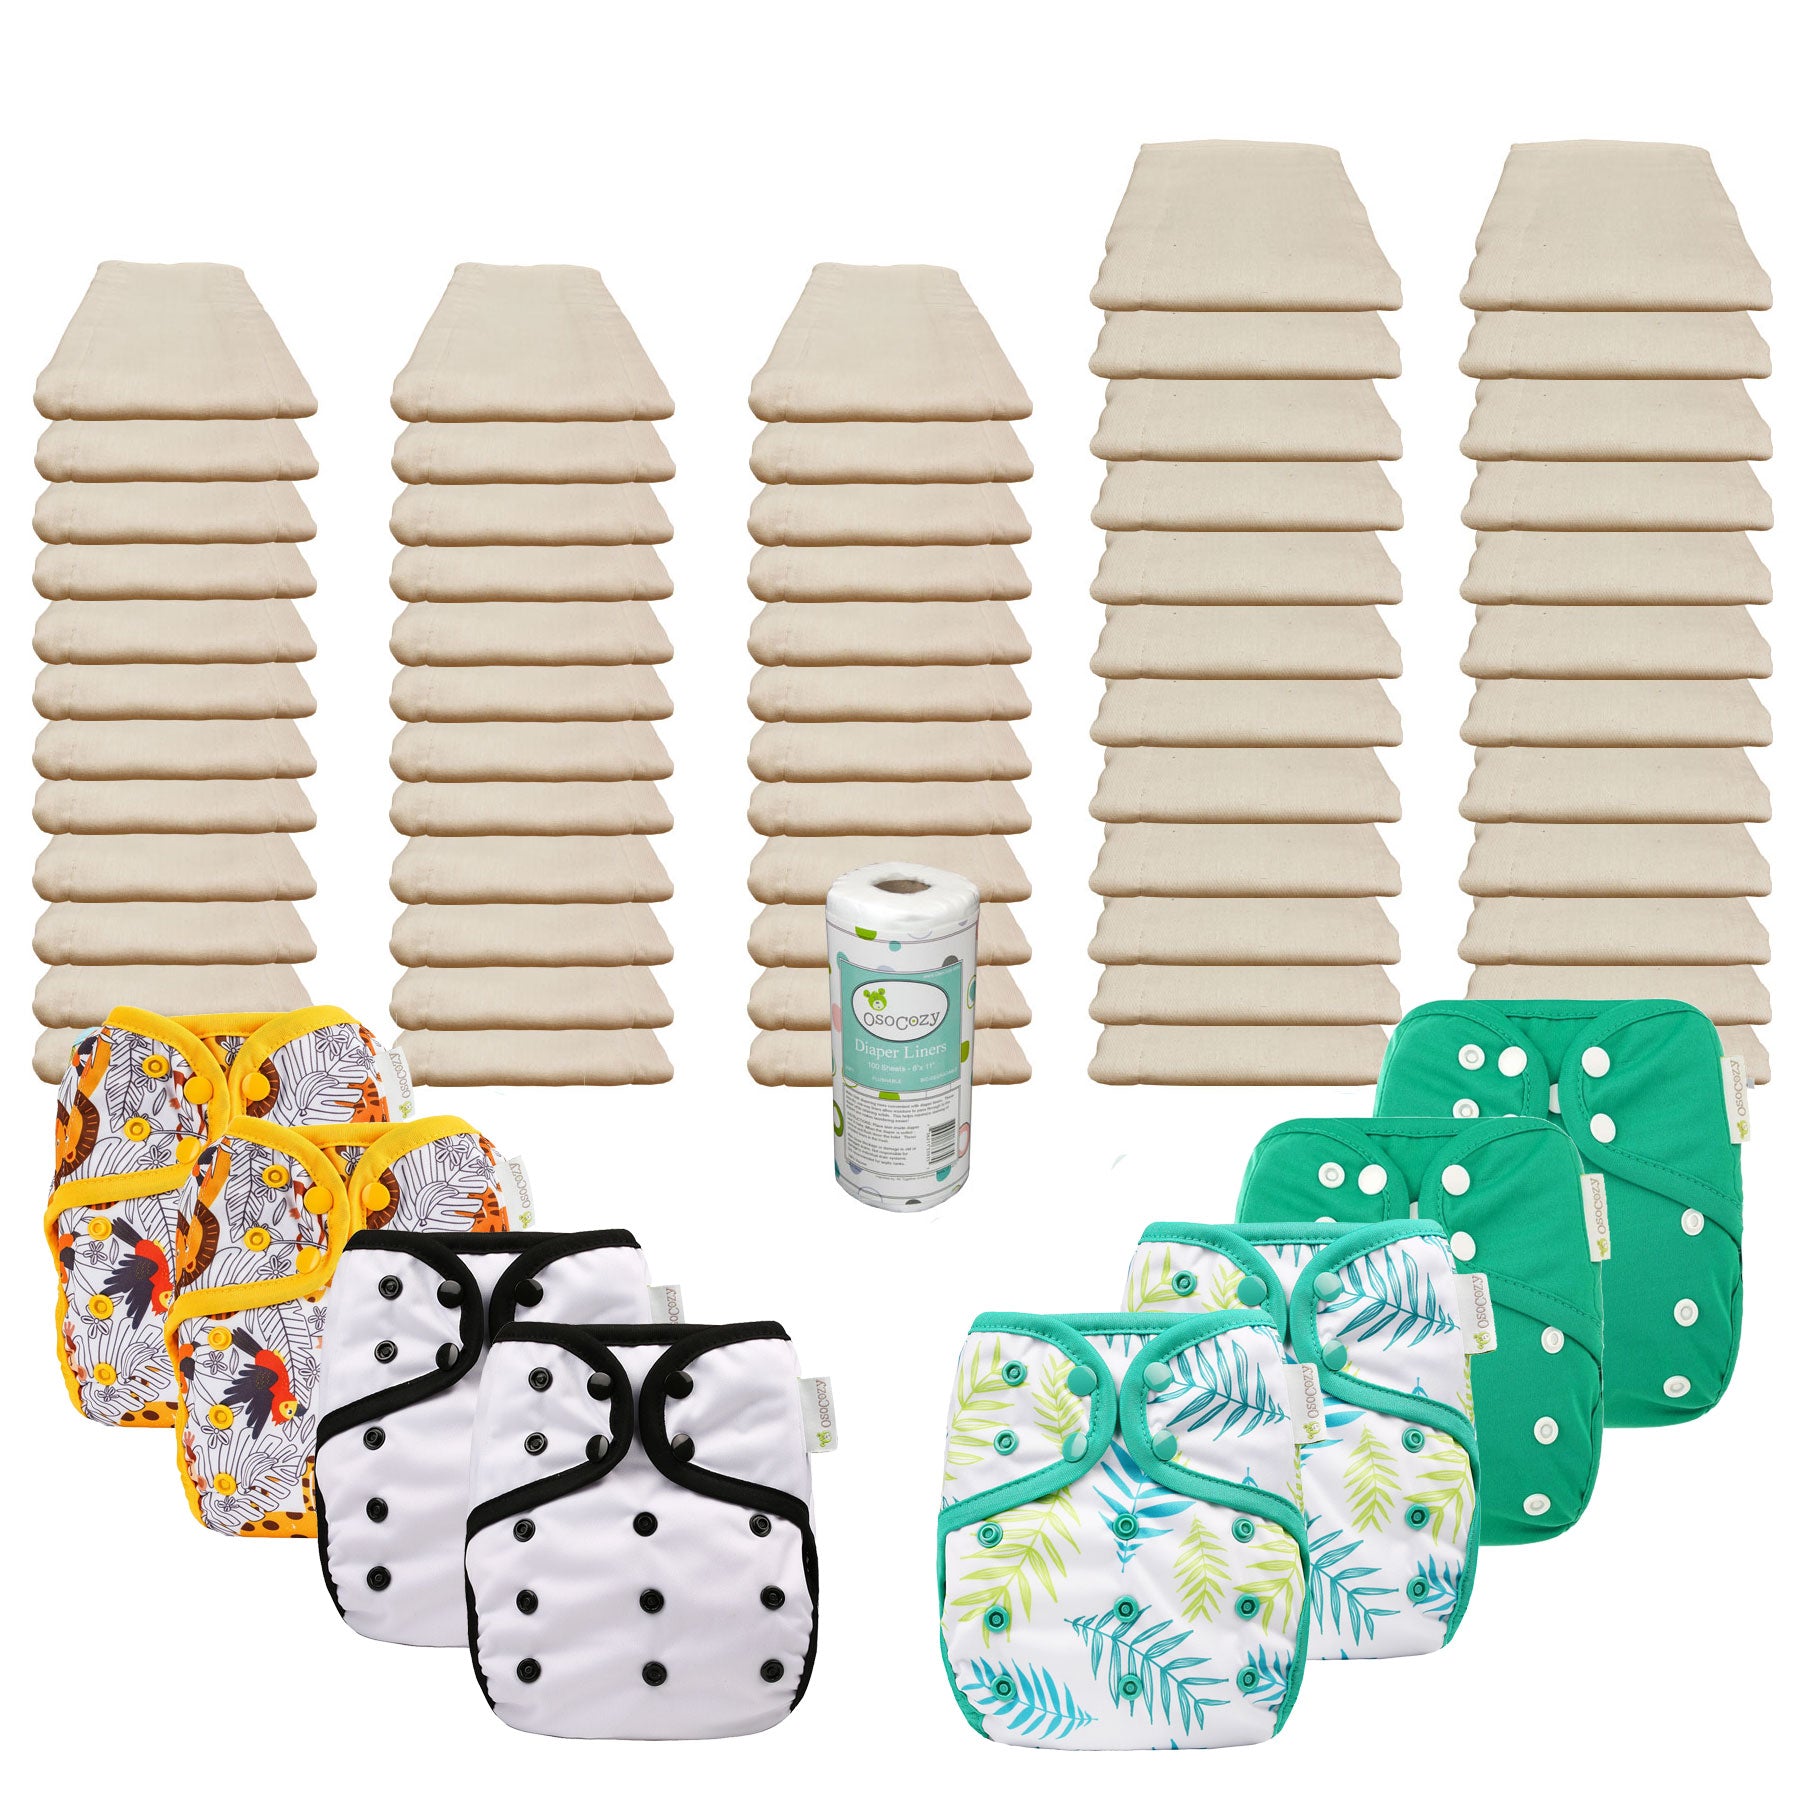 Unbleached Basic Prefold Diaper Packages with OsoCozy One Sized Covers